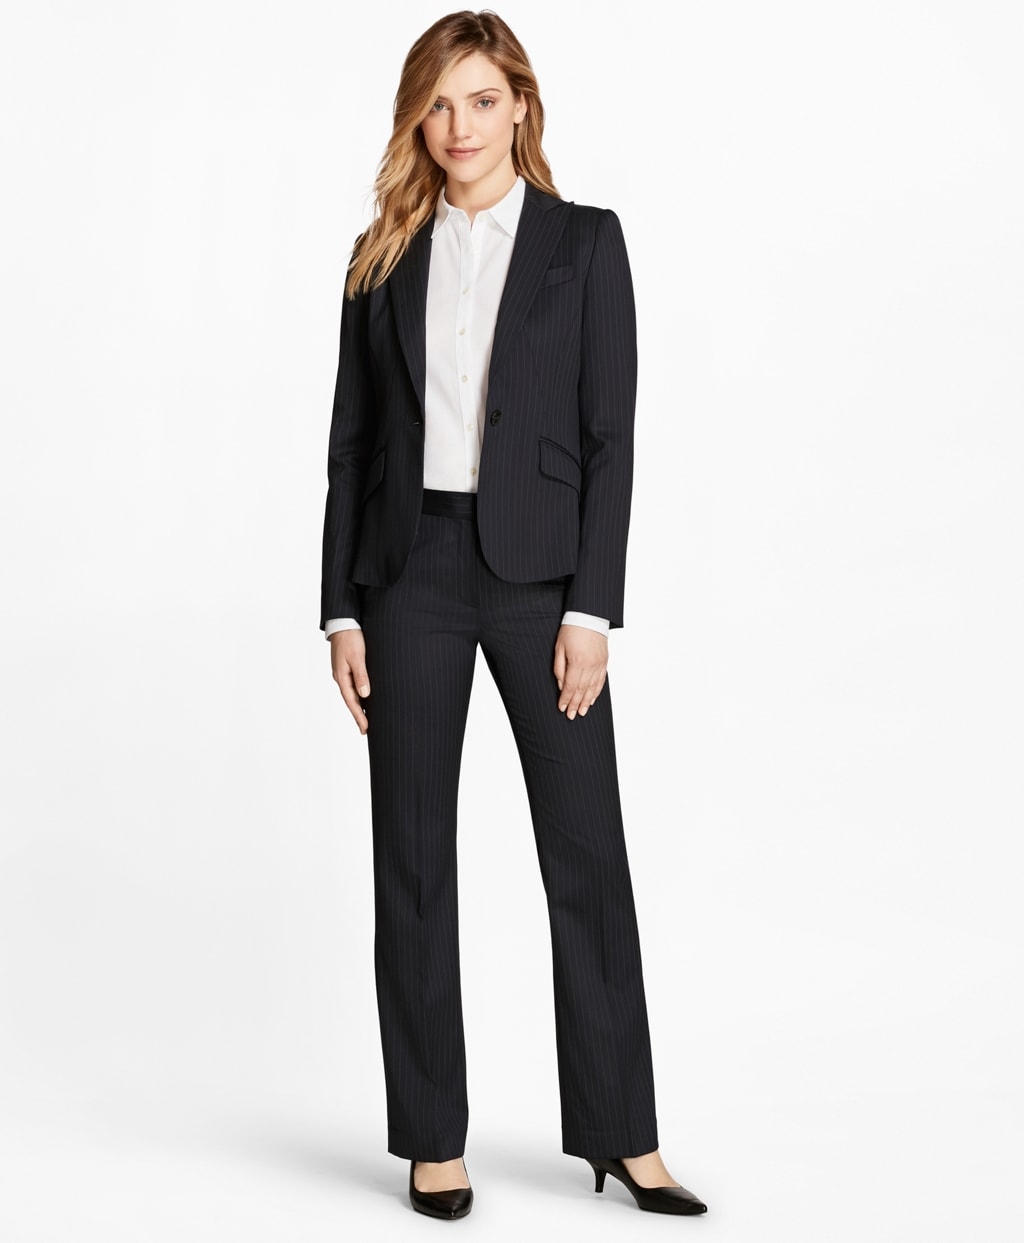 business professional dress for interview